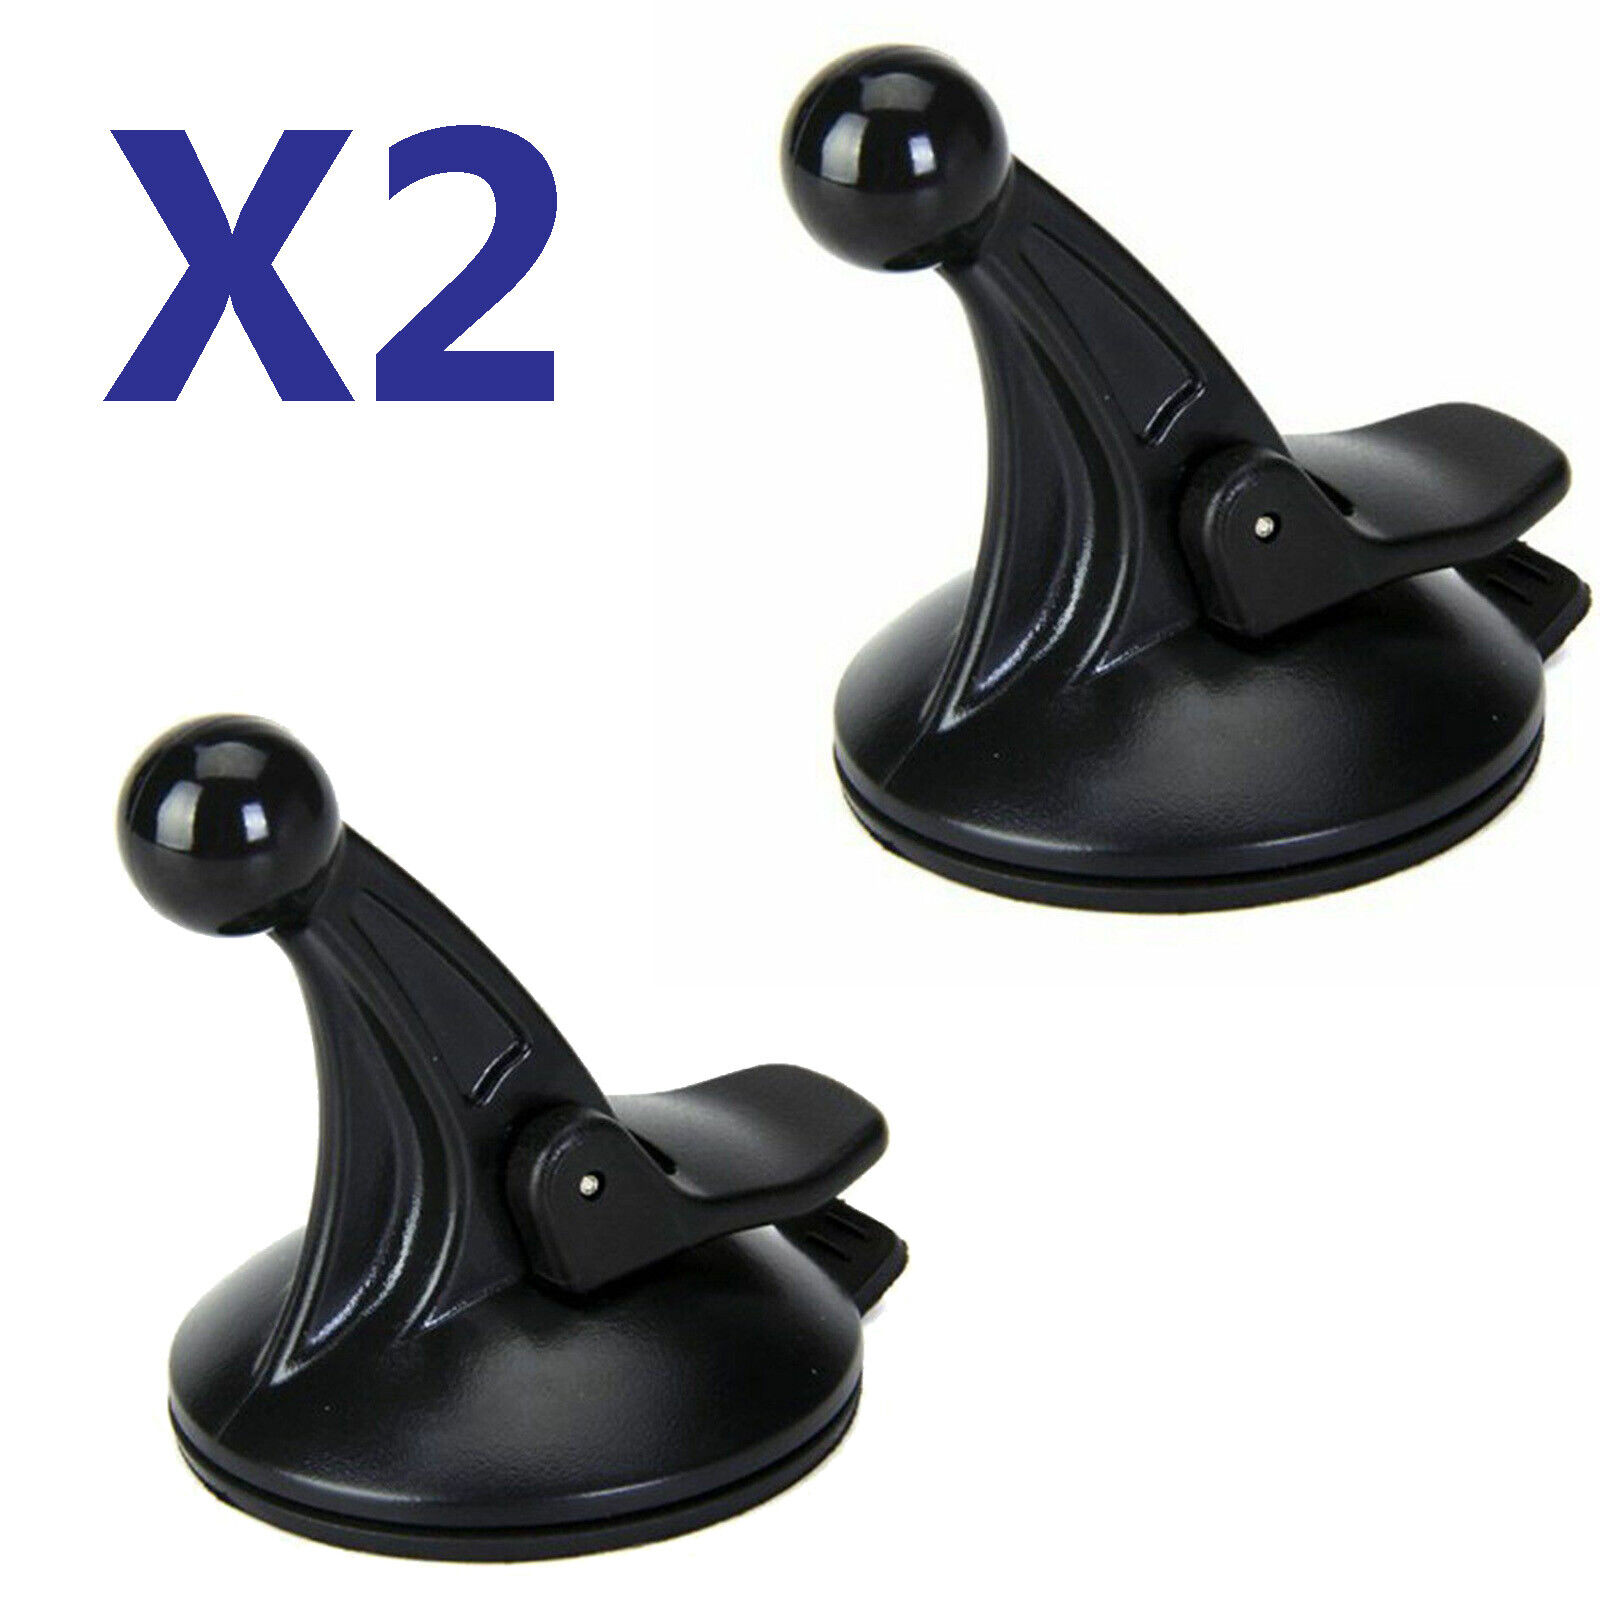 Windshield Car Suction Cup Mount GPS Holder For Garmin Nuvi DashCam 10 20 30 35